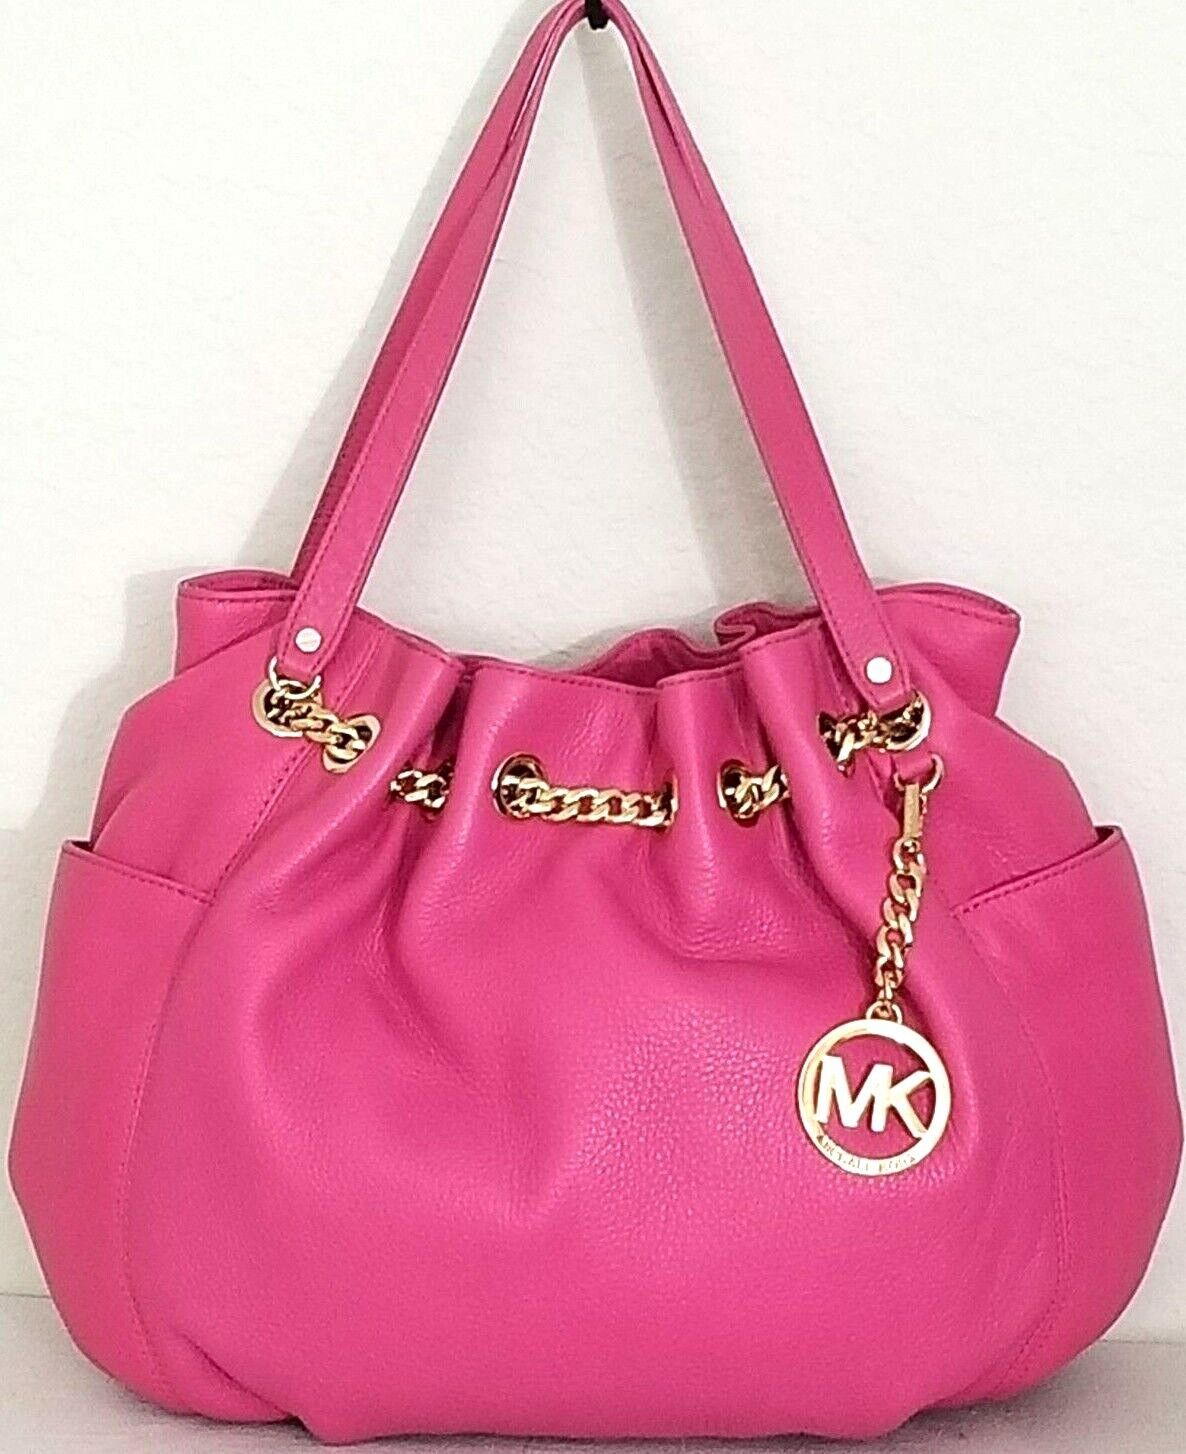 Primary image for MICHAEL KORS JET SET GOLD CHAIN LARGE ZINNIA PINK LEATHER RING TOTE BAGNWT